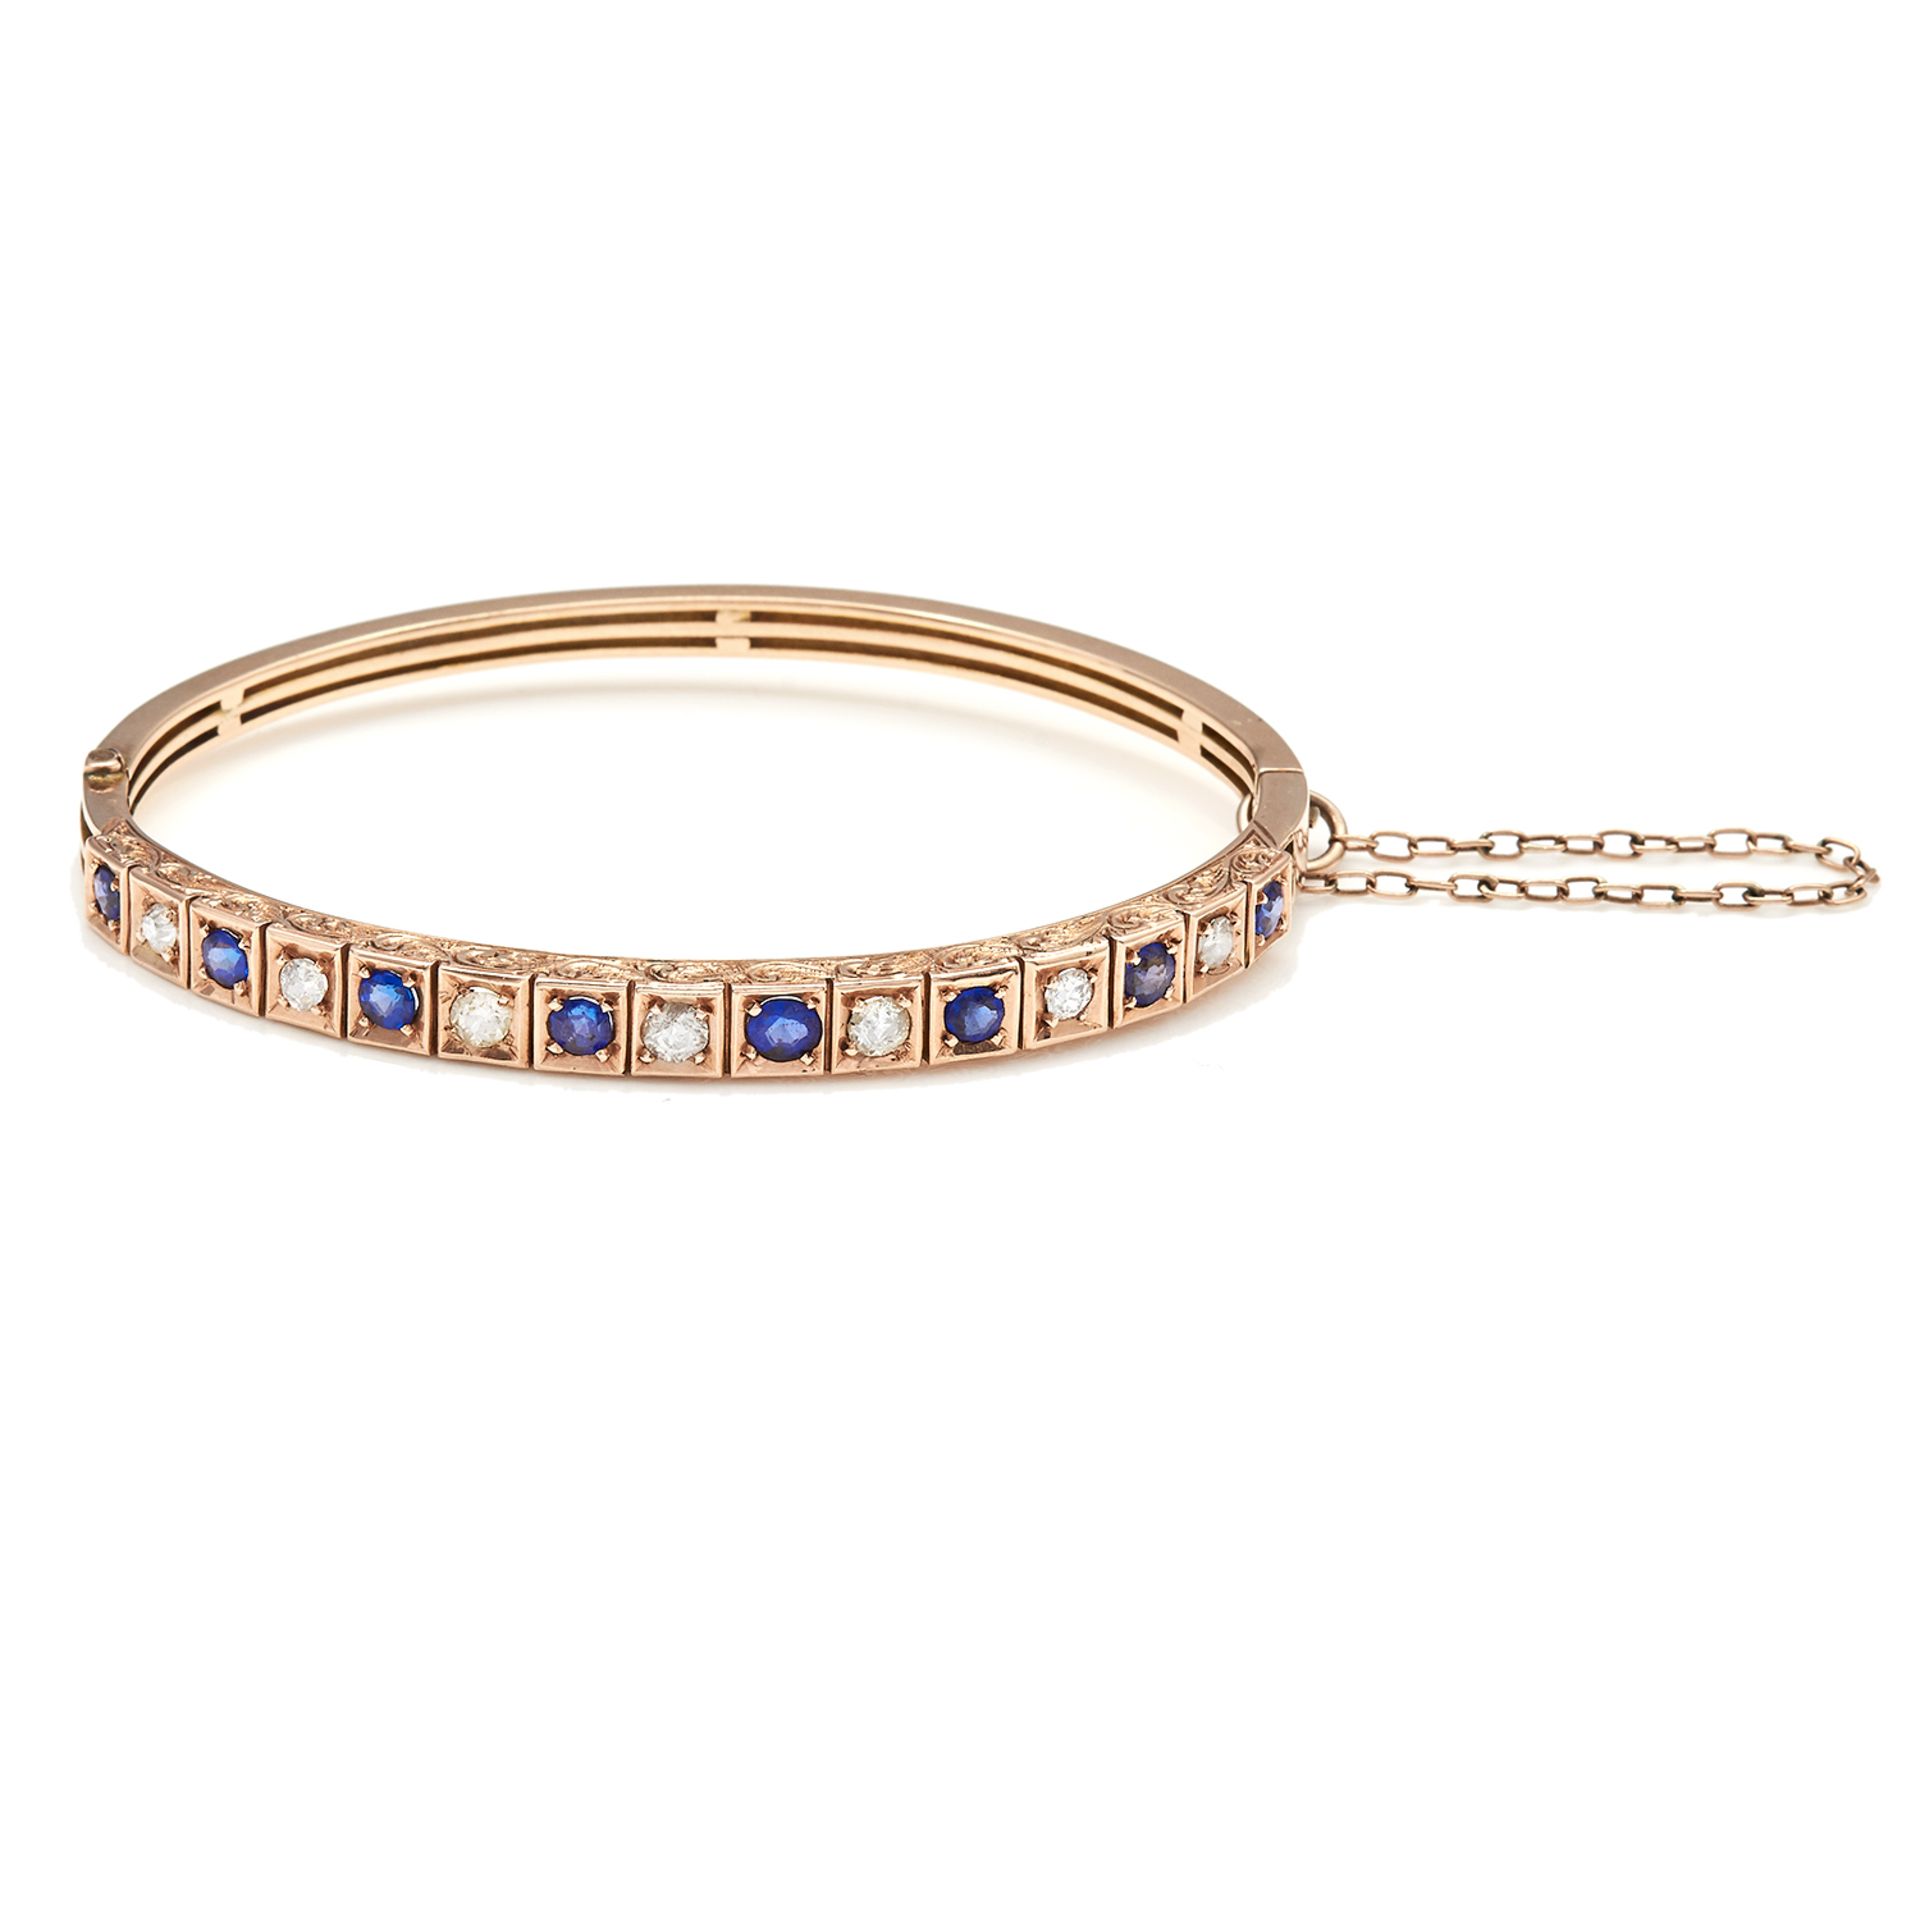 AN ANTIQUE SAPPHIRE AND DIAMOND BANGLE in 15ct yellow gold, a half hoop decorated with alternating